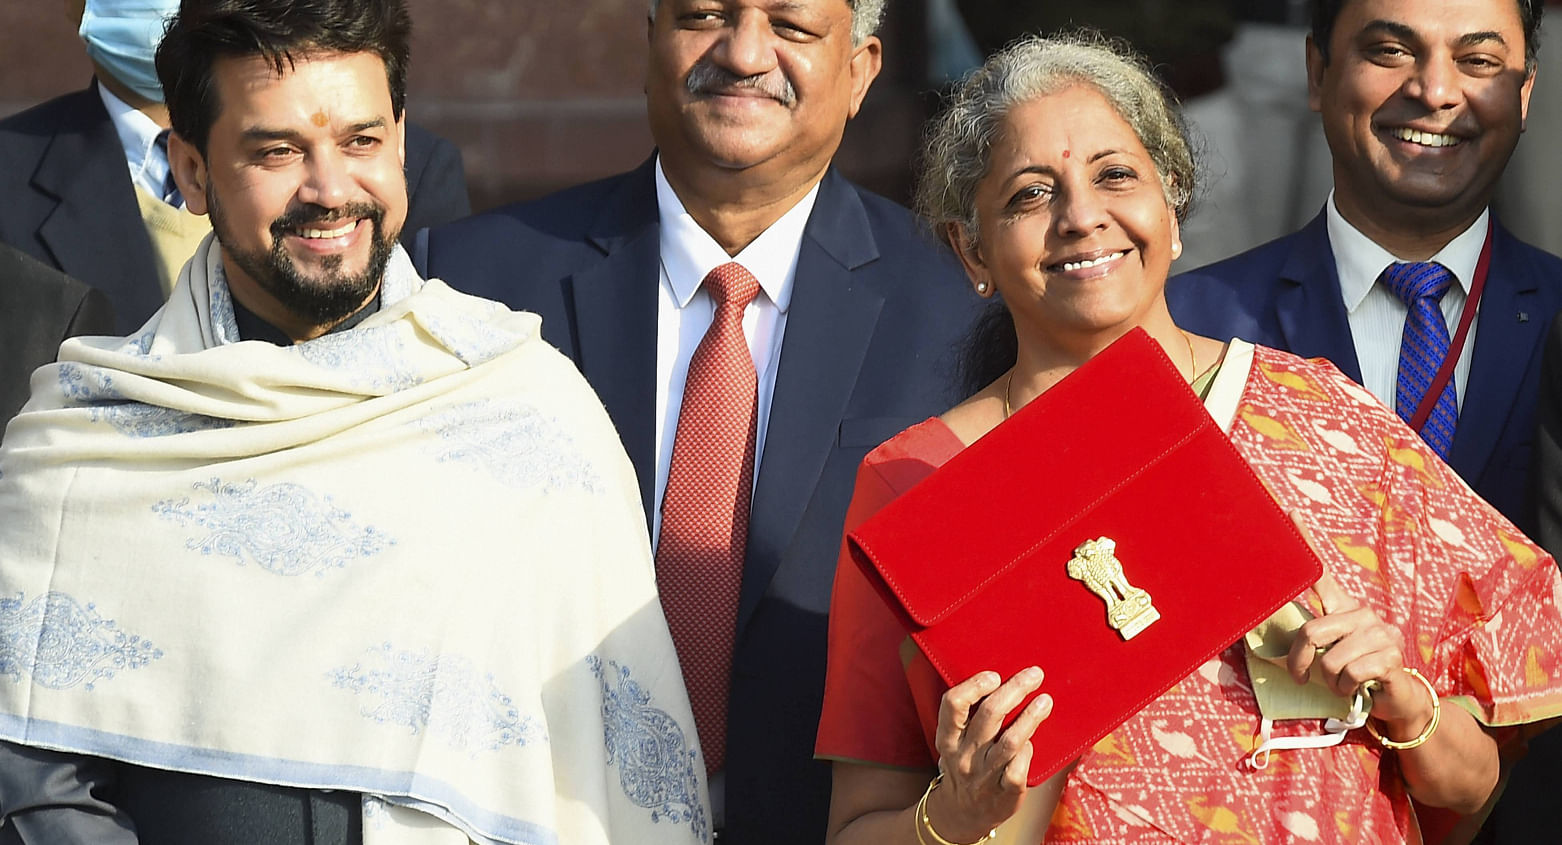 Union Finance Minister Nirmala Sitharaman holds up a folder with the Government of India logo, as India's Chief Economic Advisor Krishnamurthy Subramanian and Minister of State for Finance and Corporate Affairs Anurag Thakur look on as she leaves her office to present the Union Budget in the parliament in New Delhi, India, February 1, 2021. Credit: PTI Photo